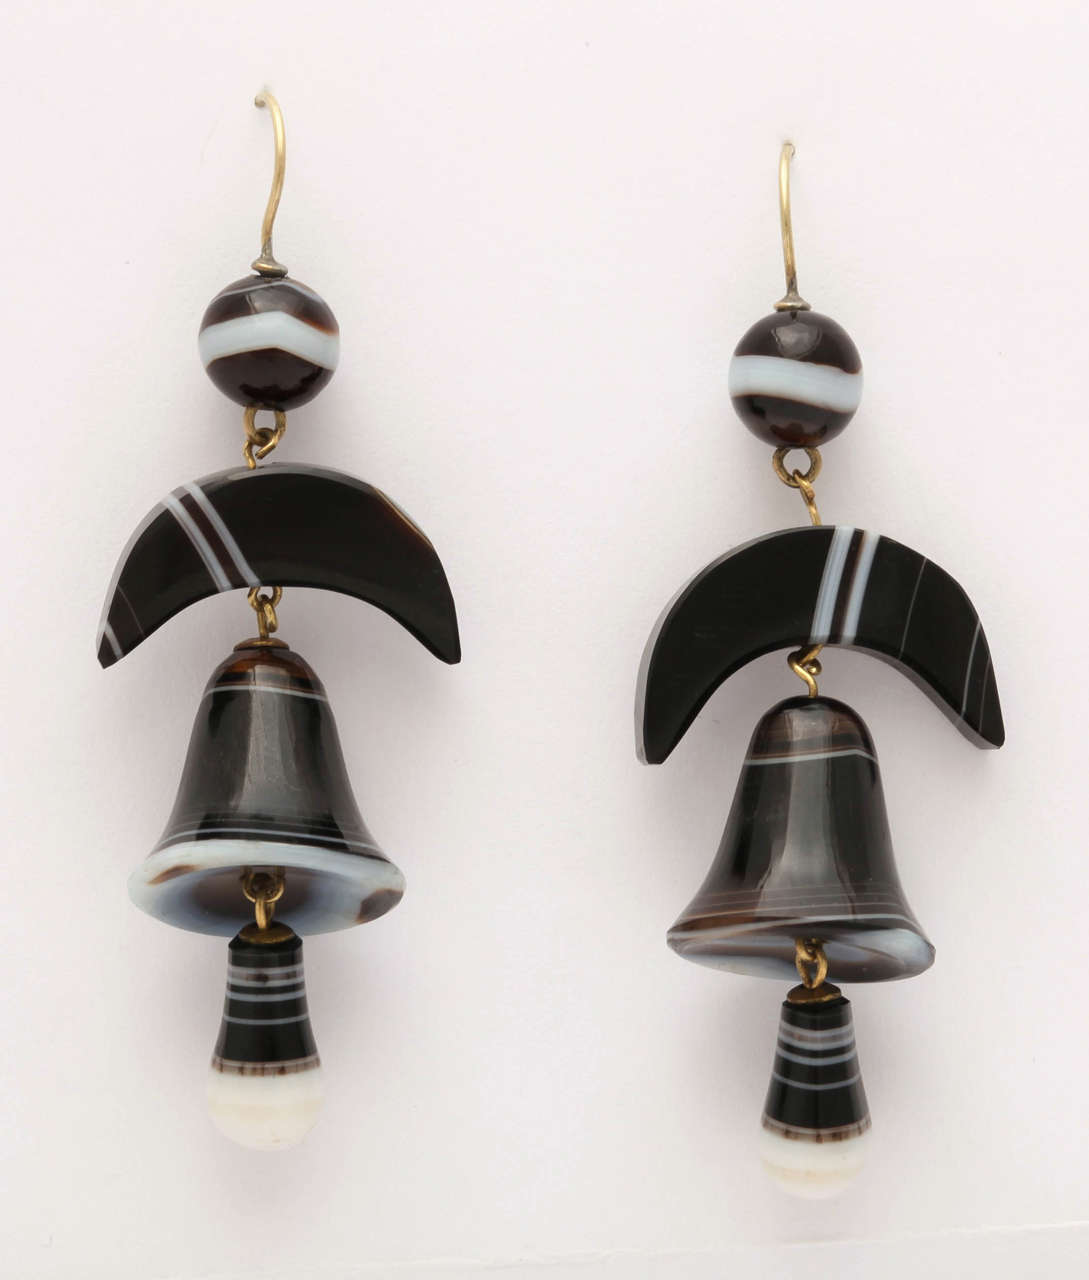 Charming Striped Agate Bell Earrings.  Victorian Ca 1870-80.  Gold wire drops.